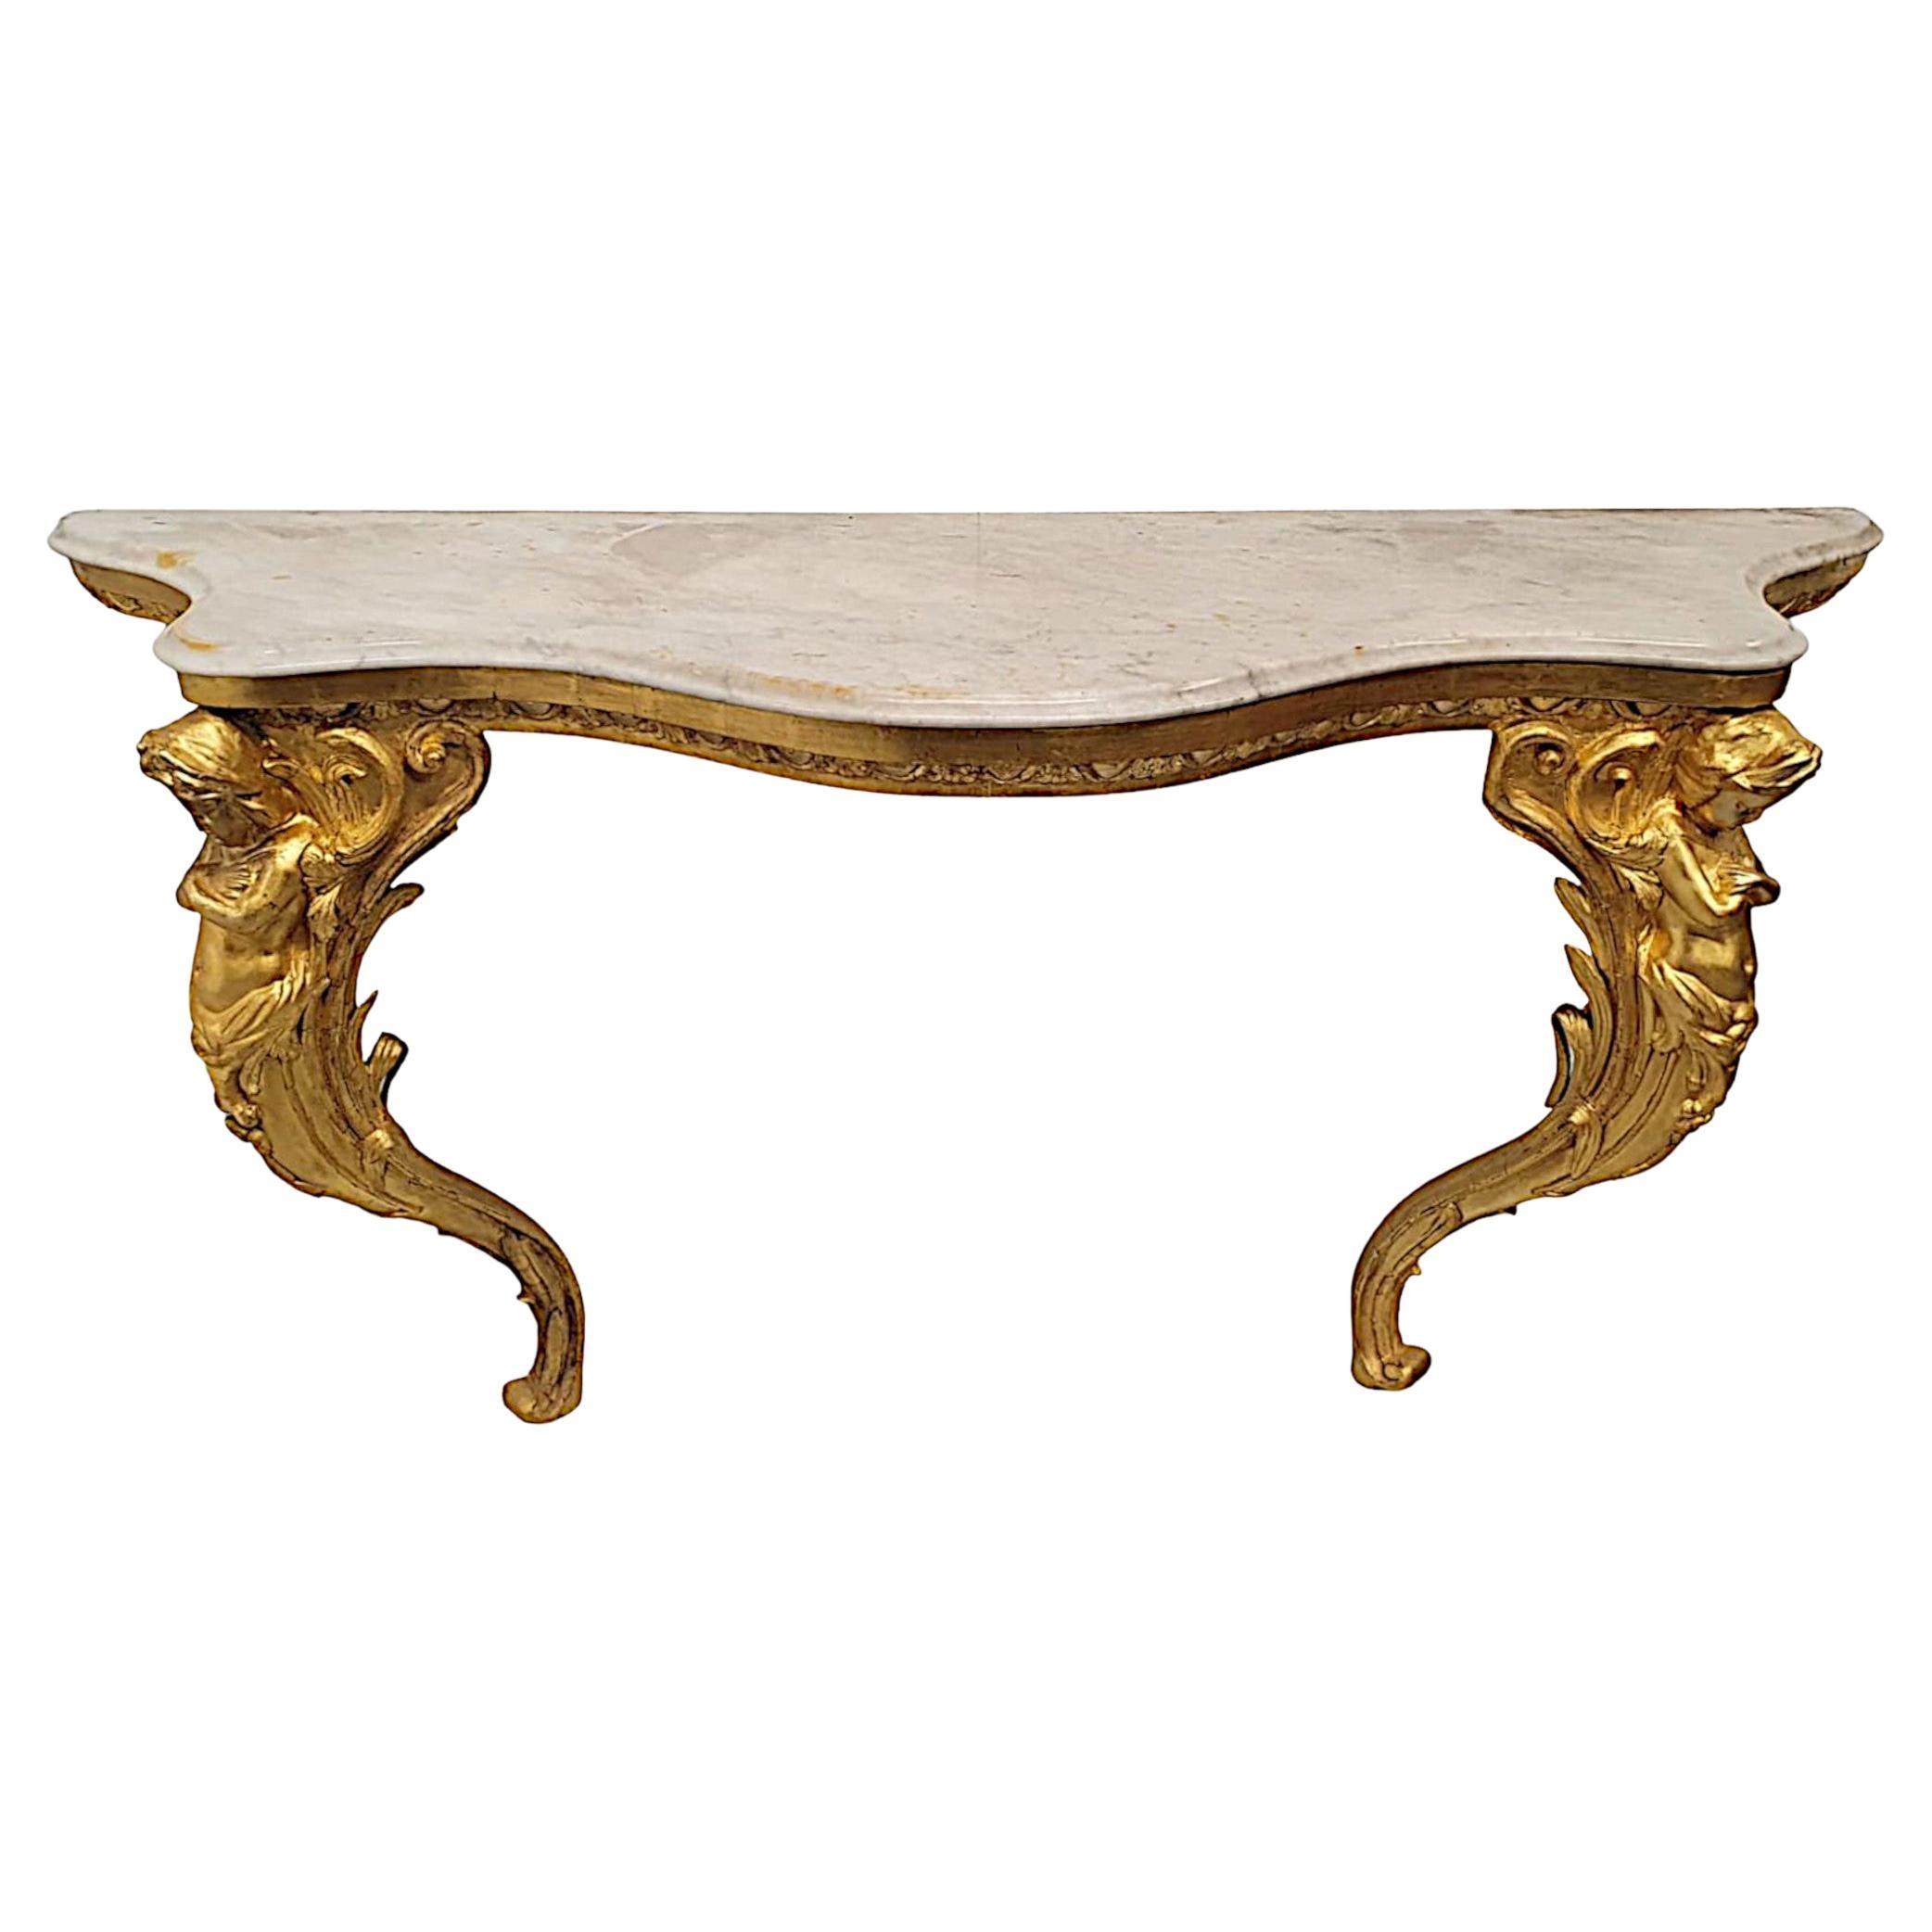  A Very Fine and Rare 19th Century marble Top Giltwood Console Table 